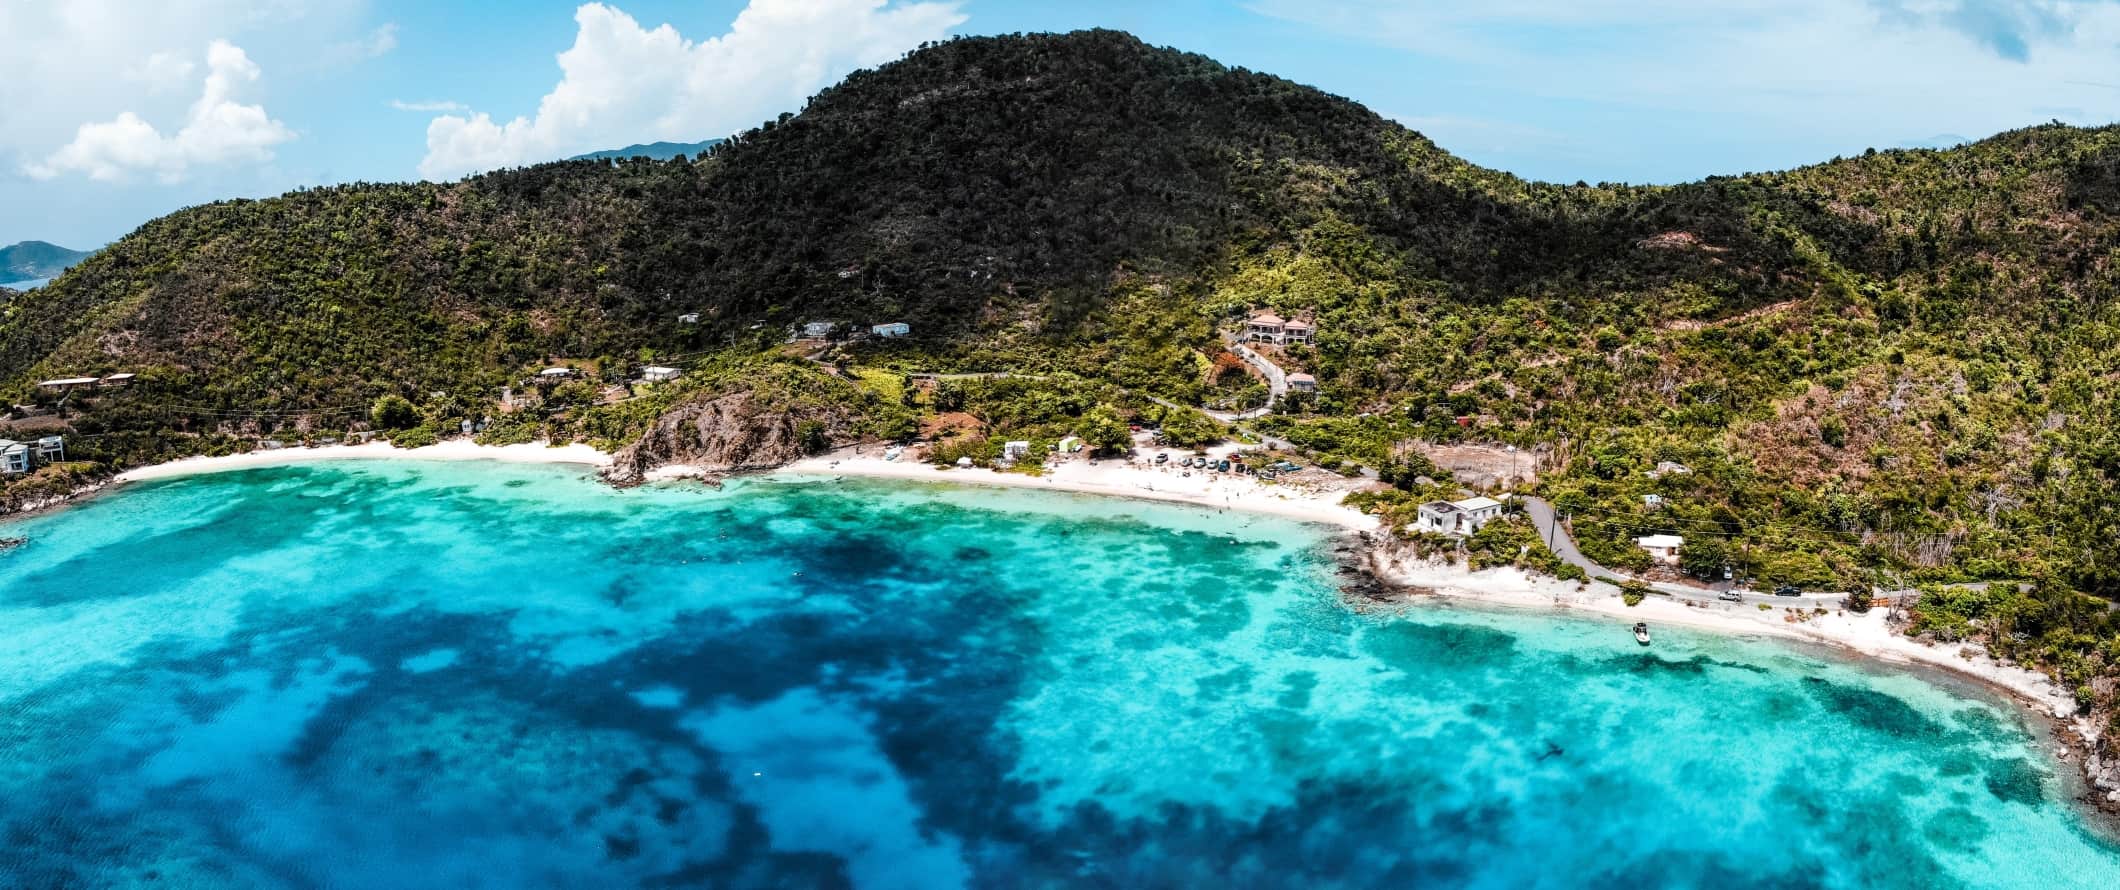 Panoramic view of the crystal clear turquoise water, white sand beaches, and rolling green hills of Saint John, USVI